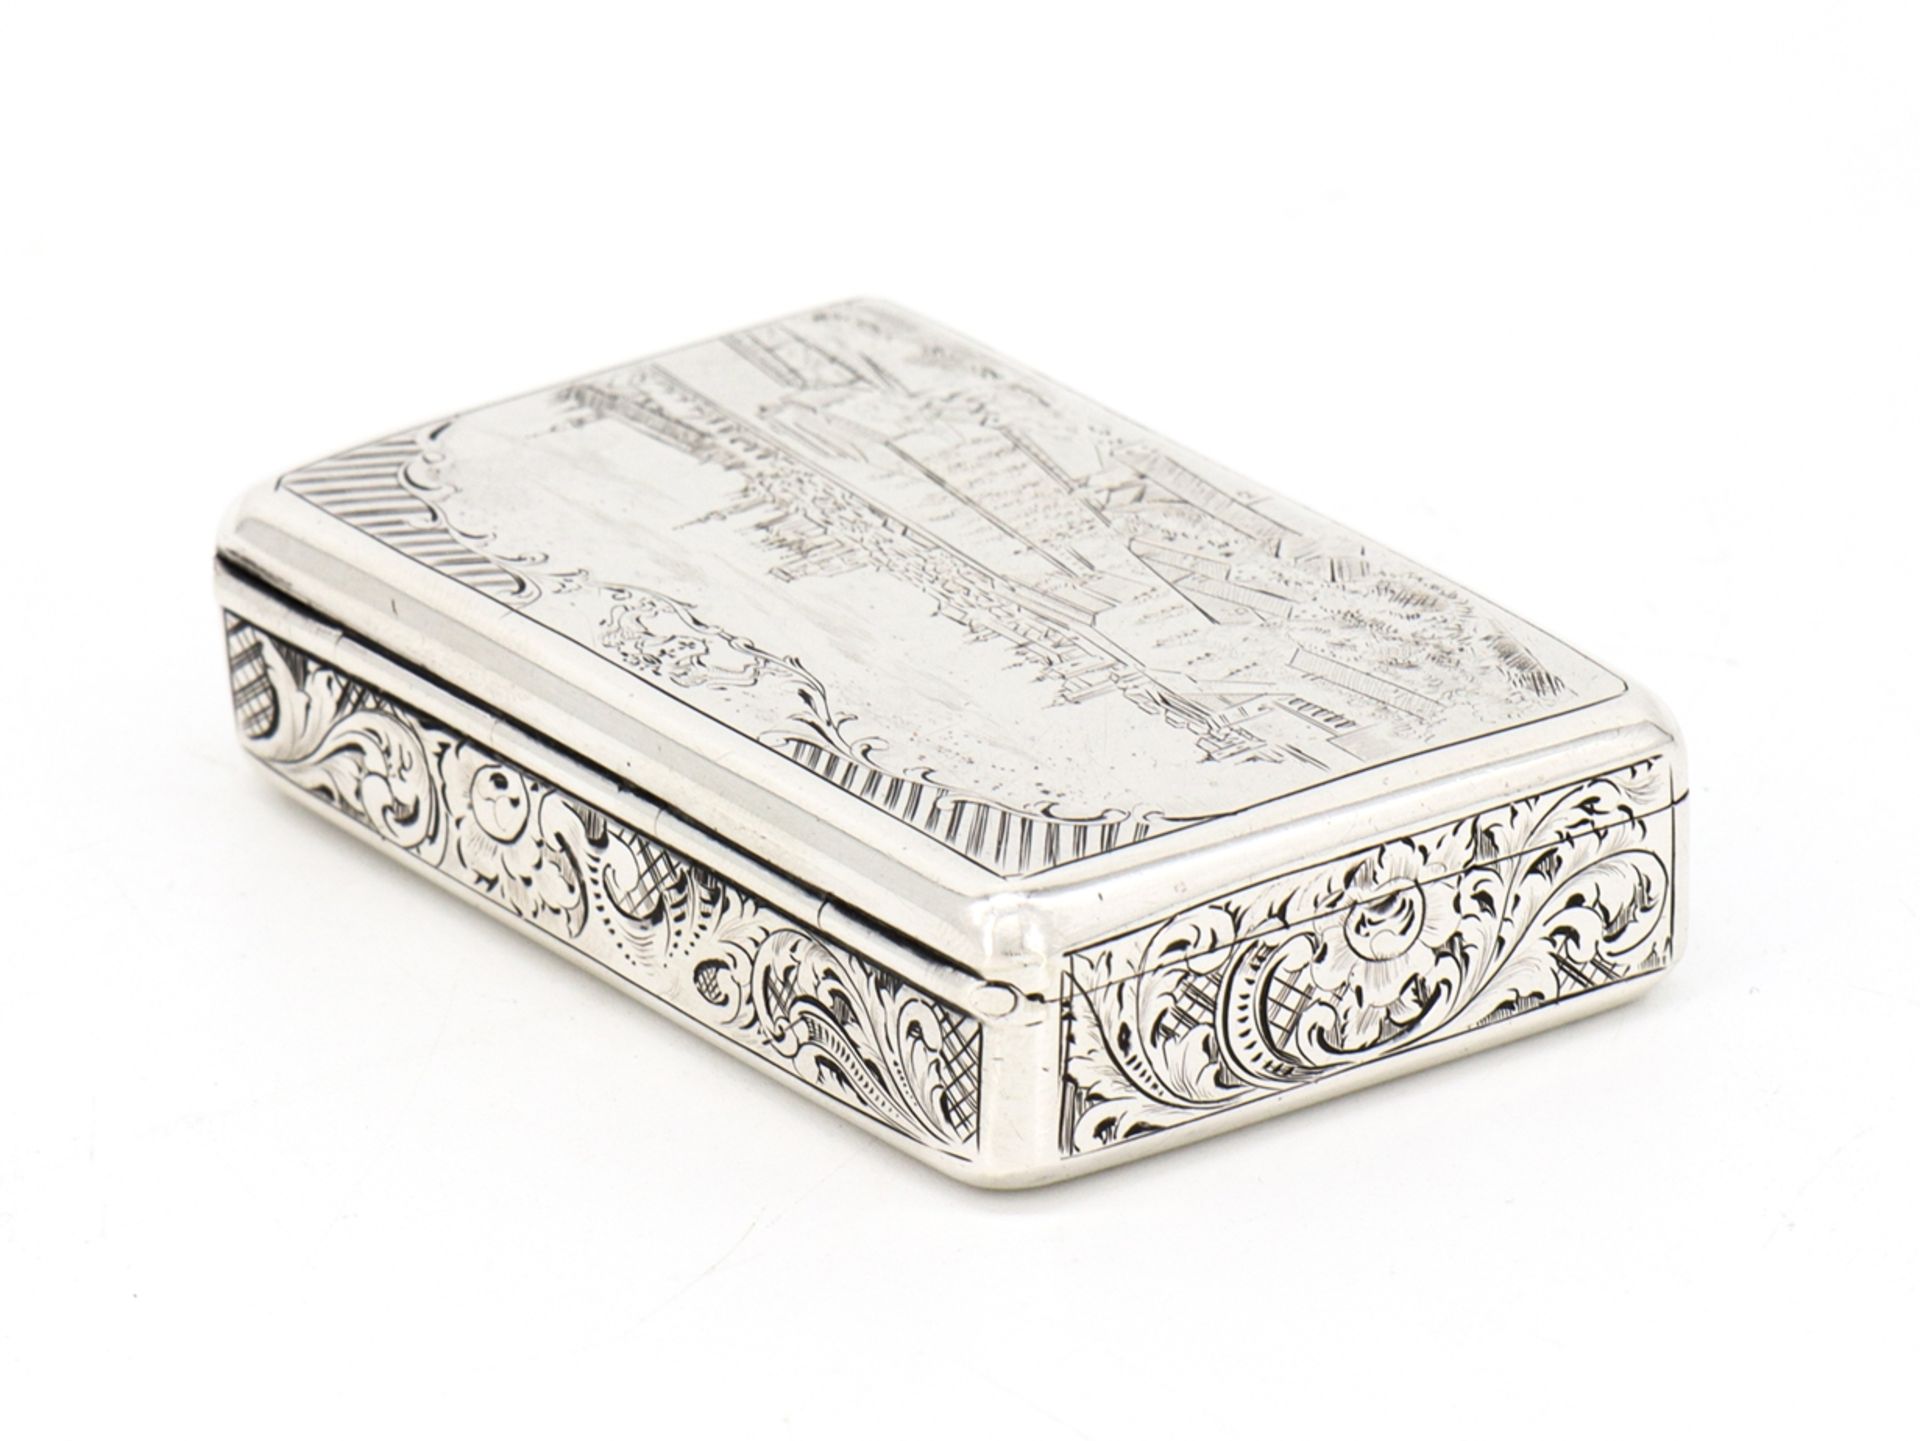 Match silver case with finely chased city view, around 1850 - Image 4 of 9